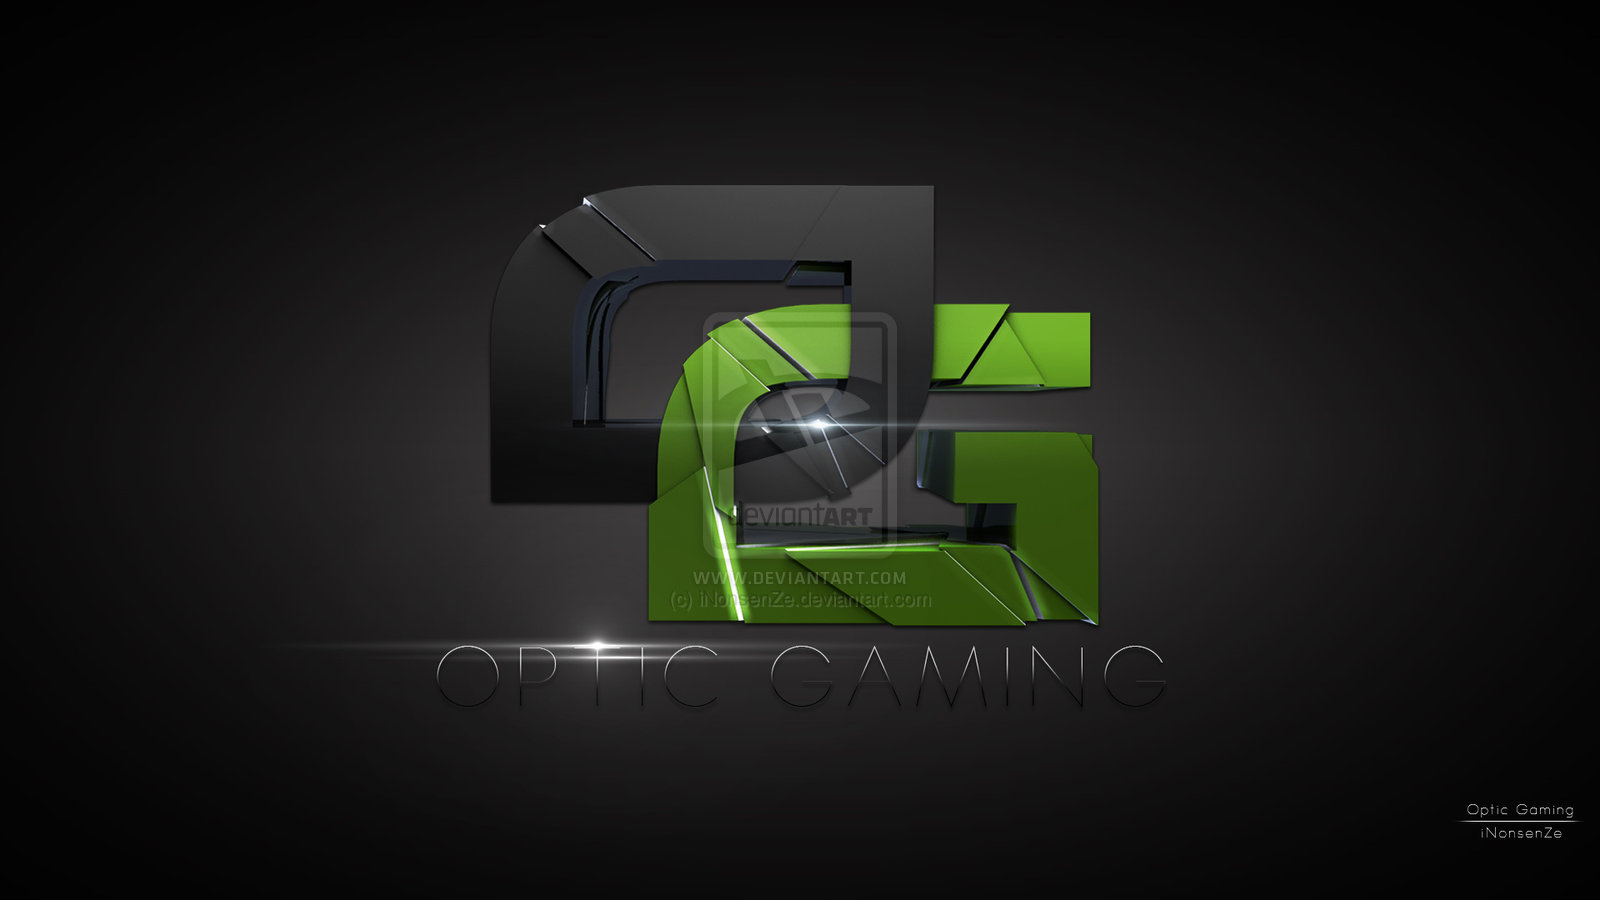 optic gaming by inonsenze digital art 3 dimensional art other optic 1600x900